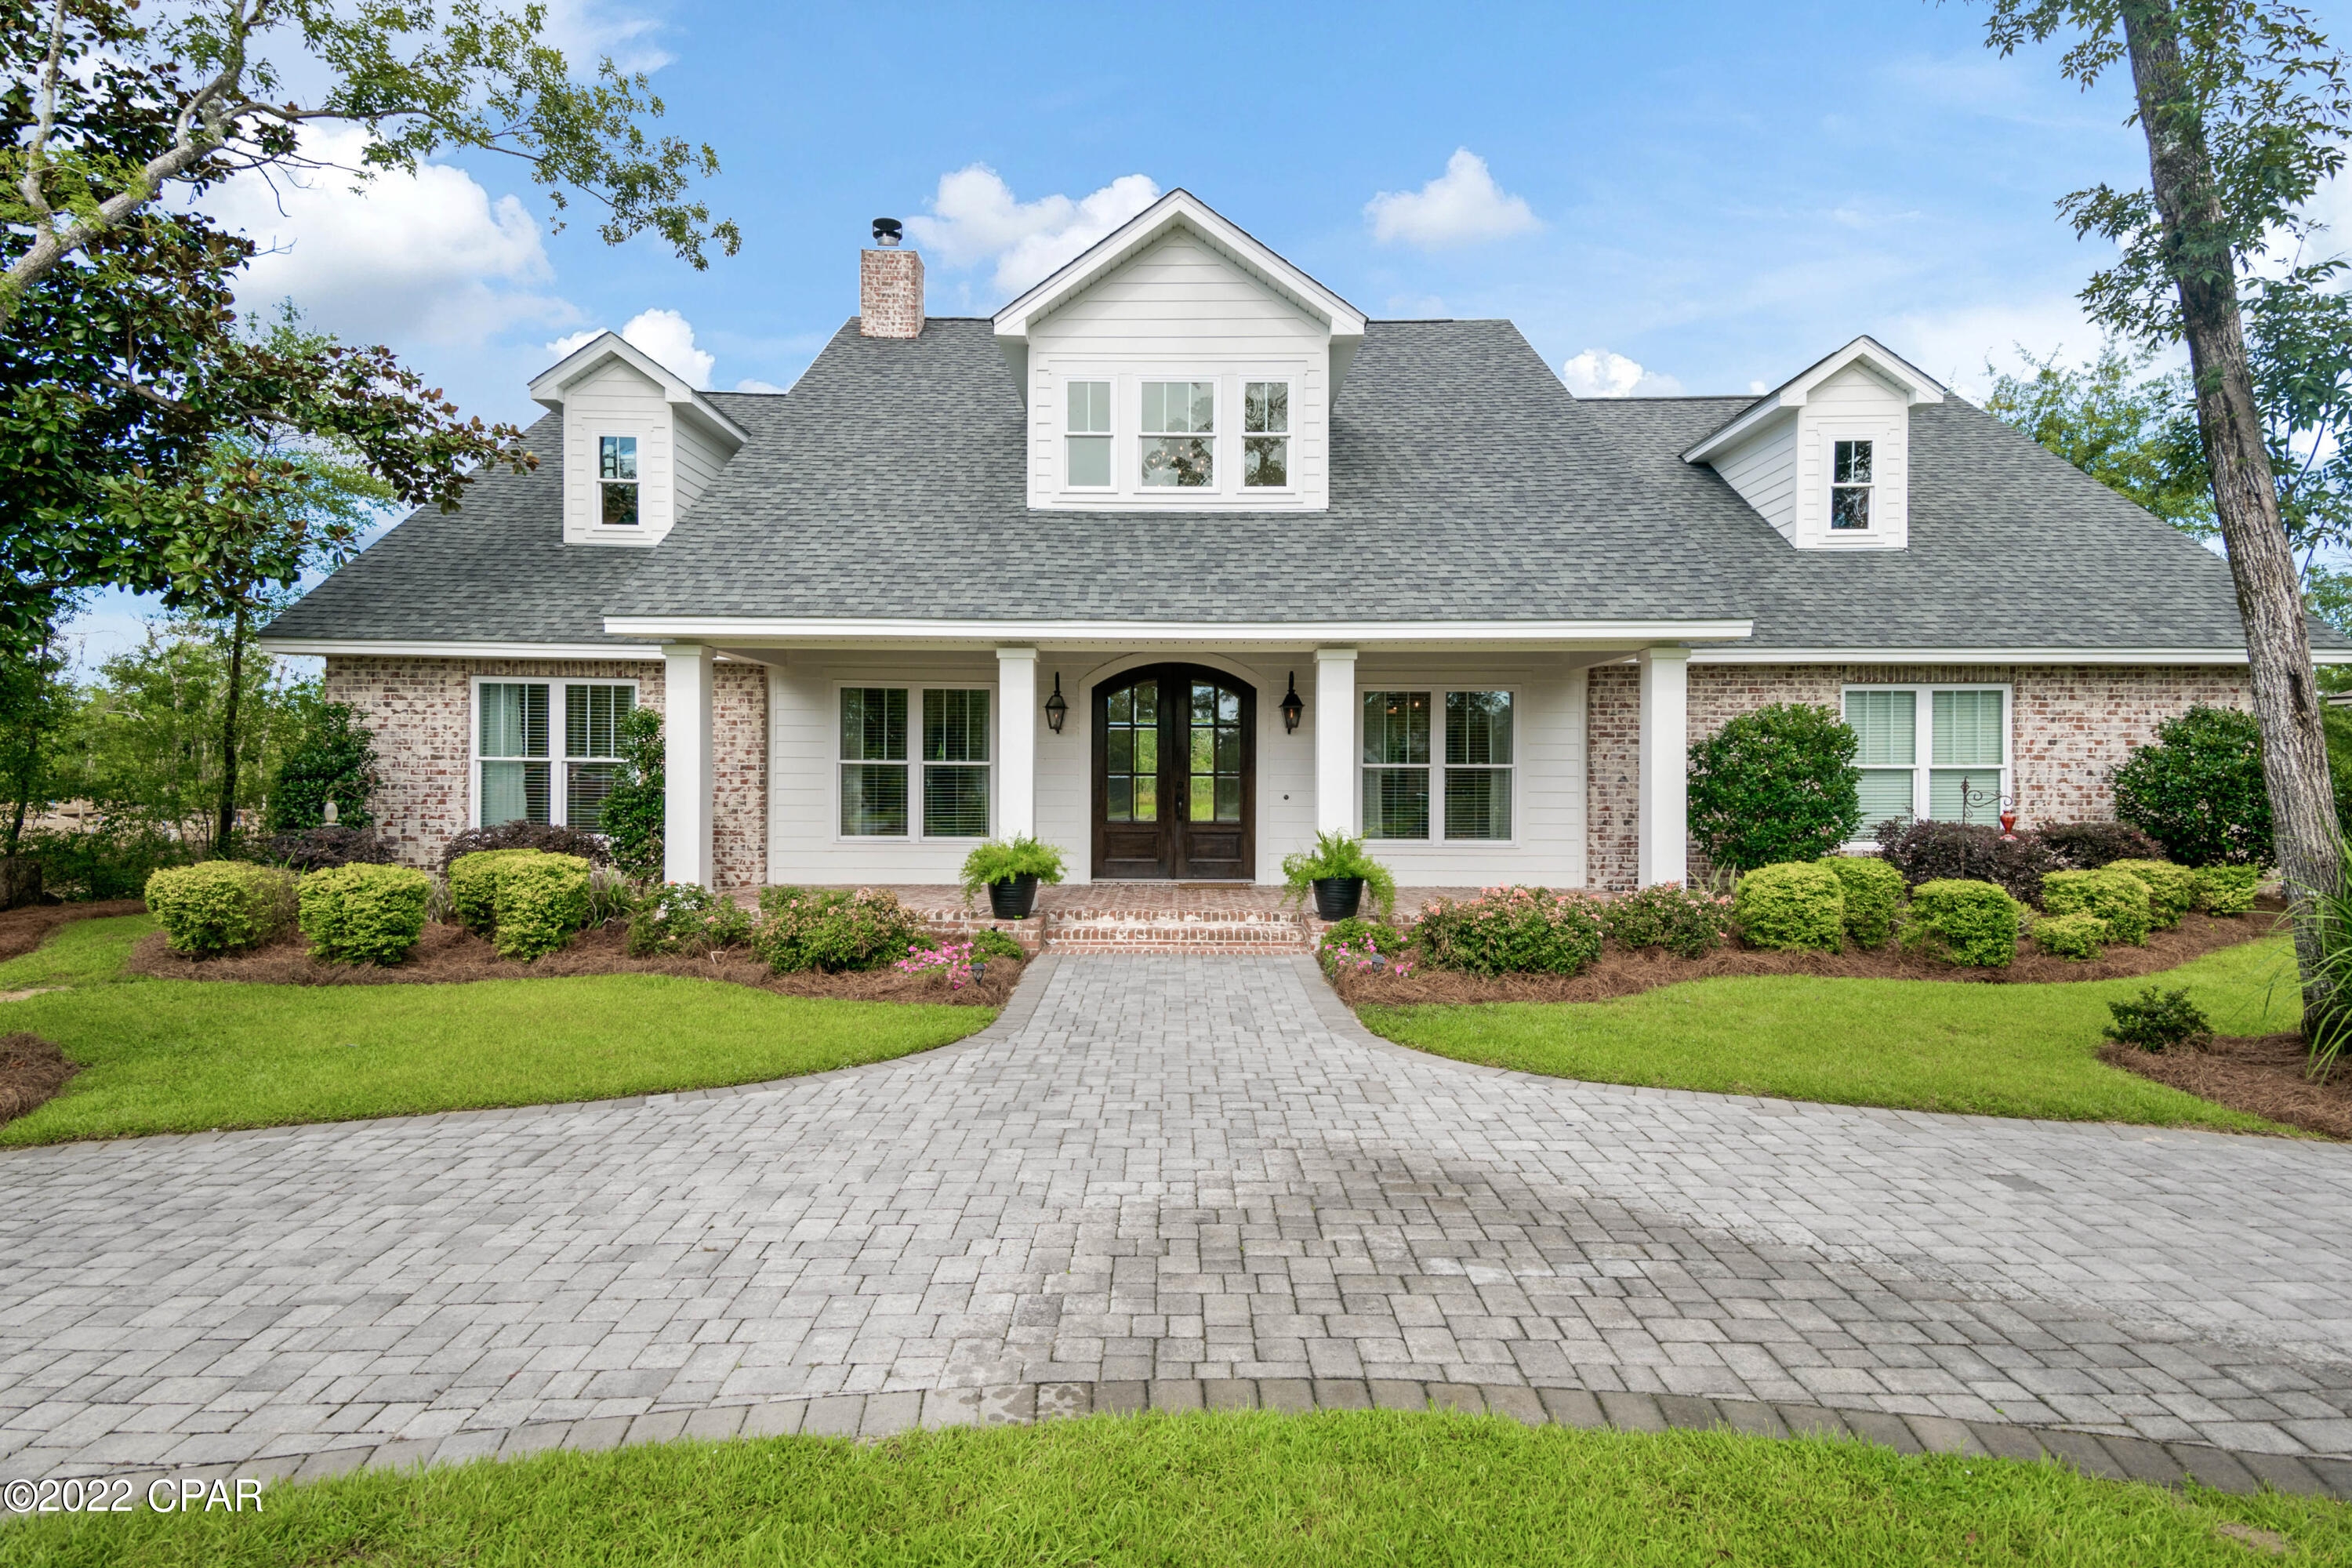 Homes for sale in Panama City | View 9713 Summer Creek Drive | 5 Beds, 4 Baths